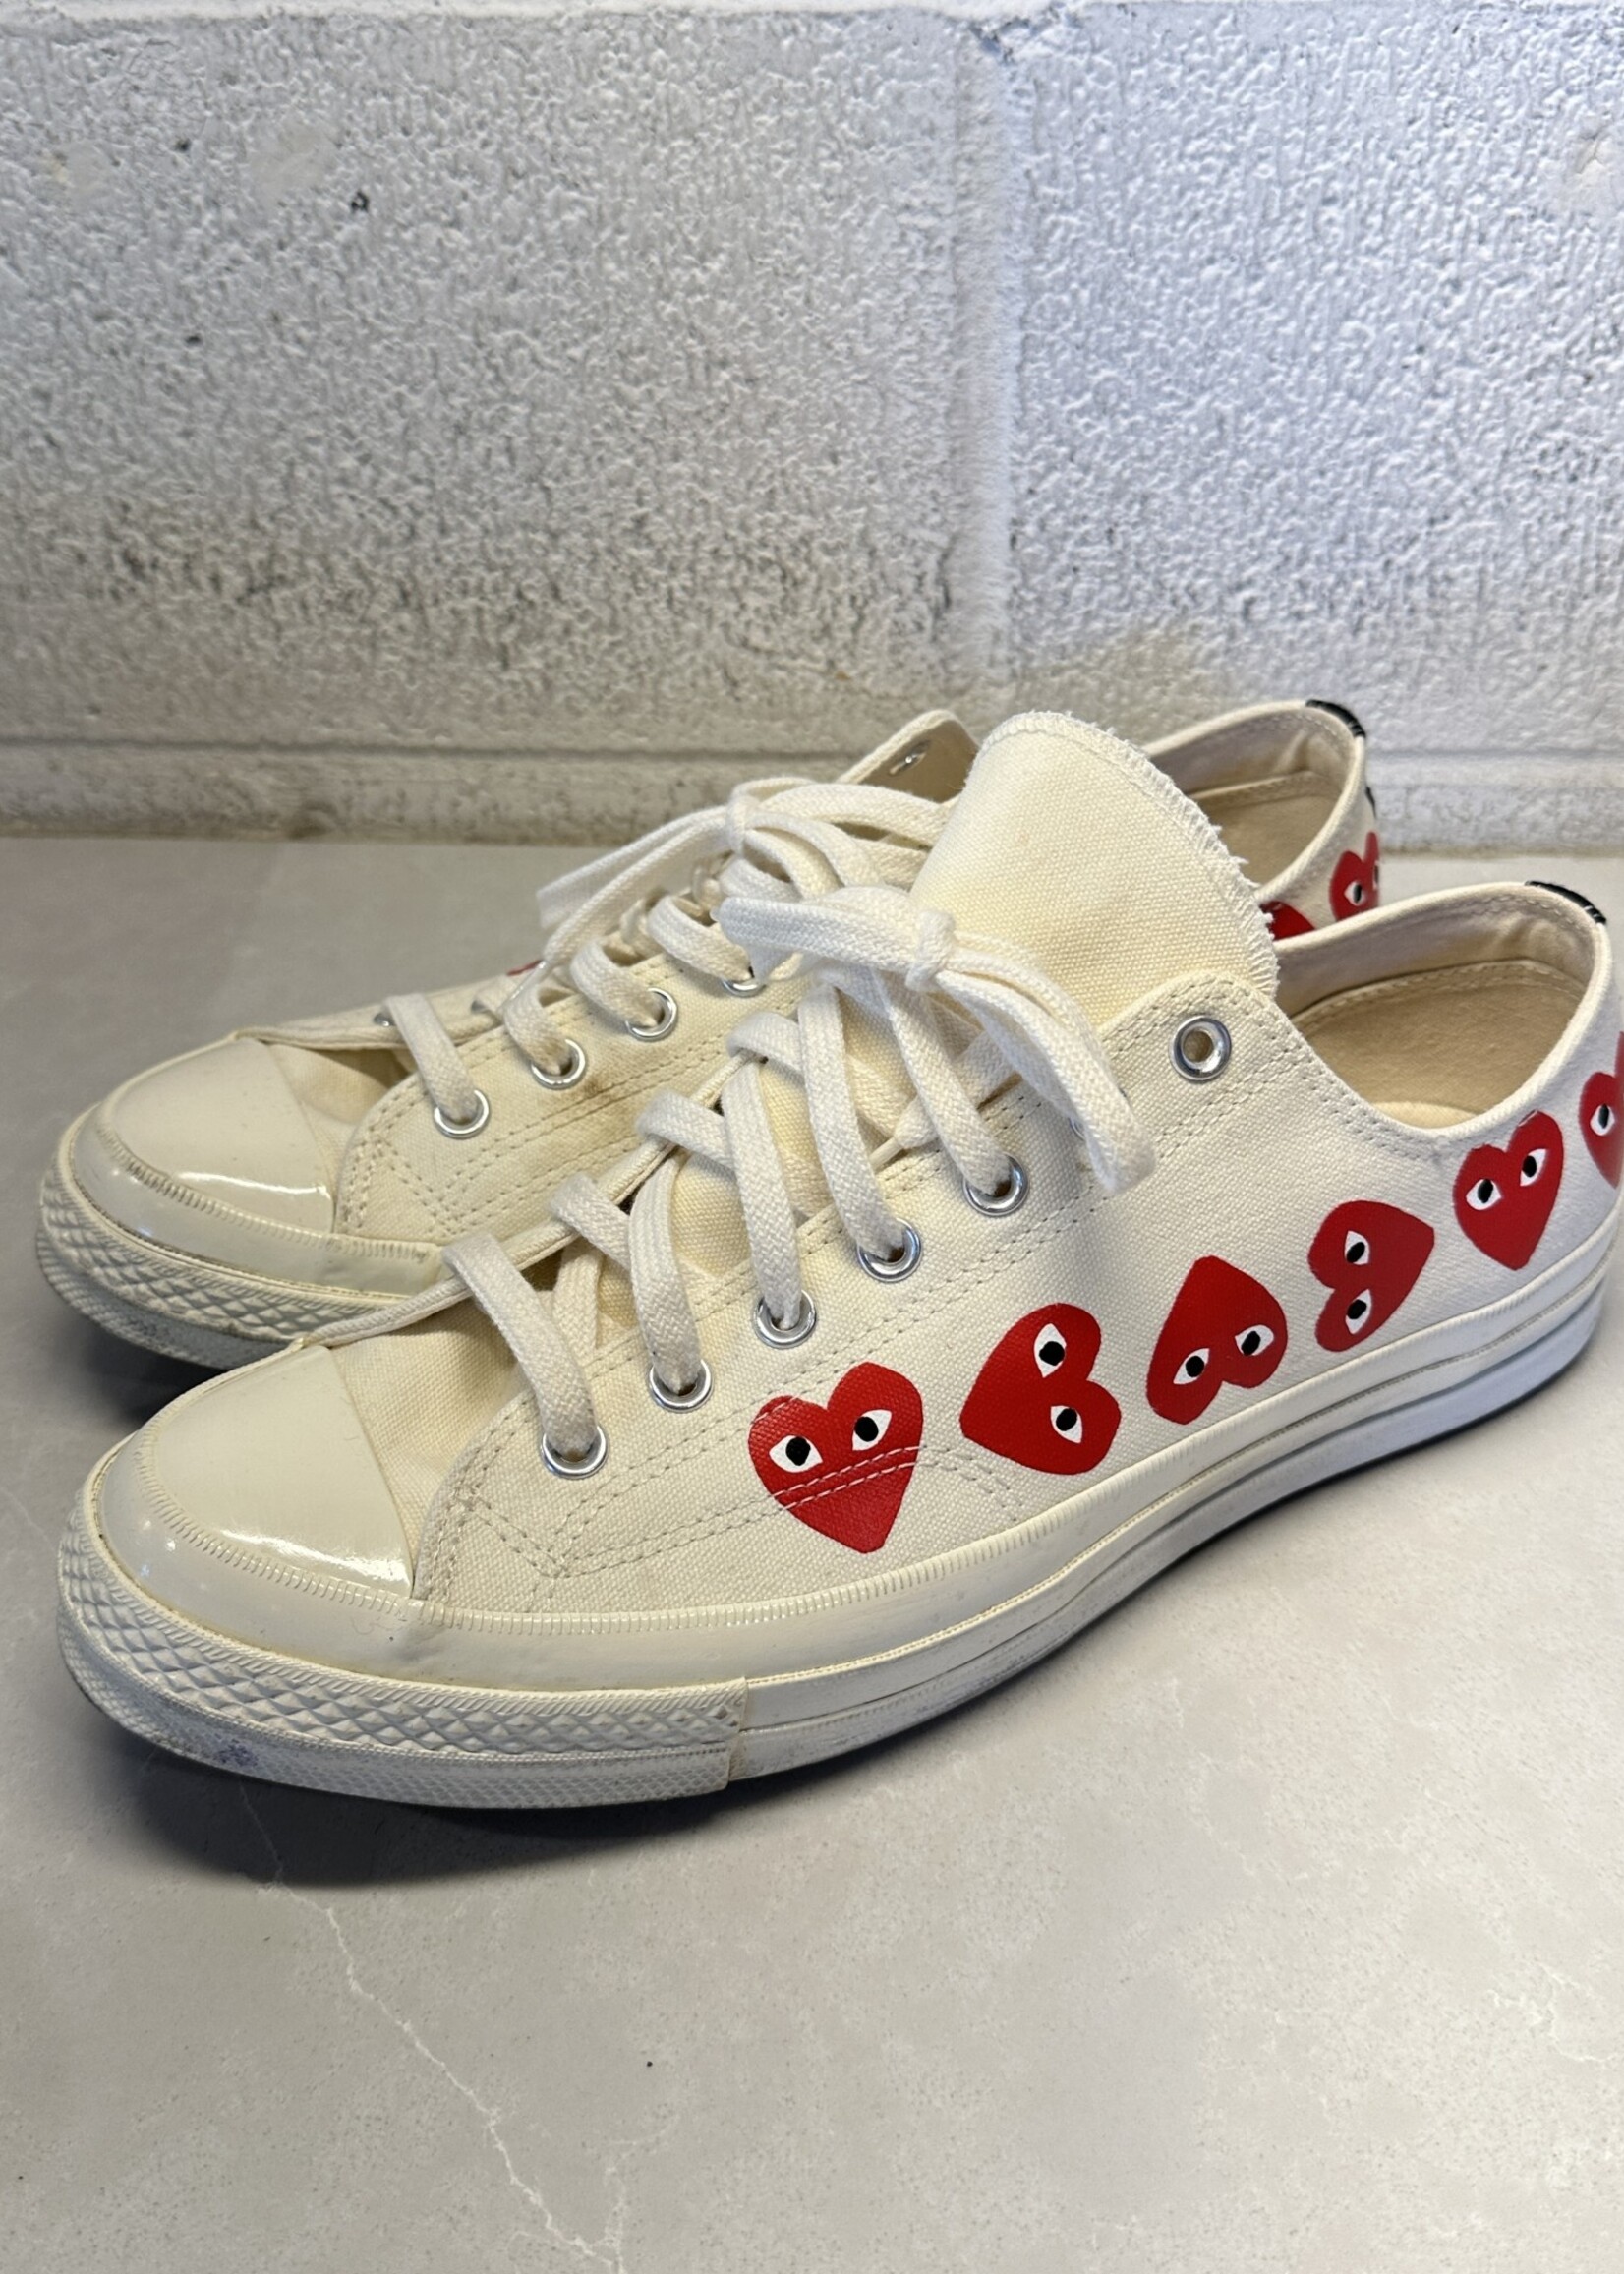 Converse x CDG Play White Low Tops 12